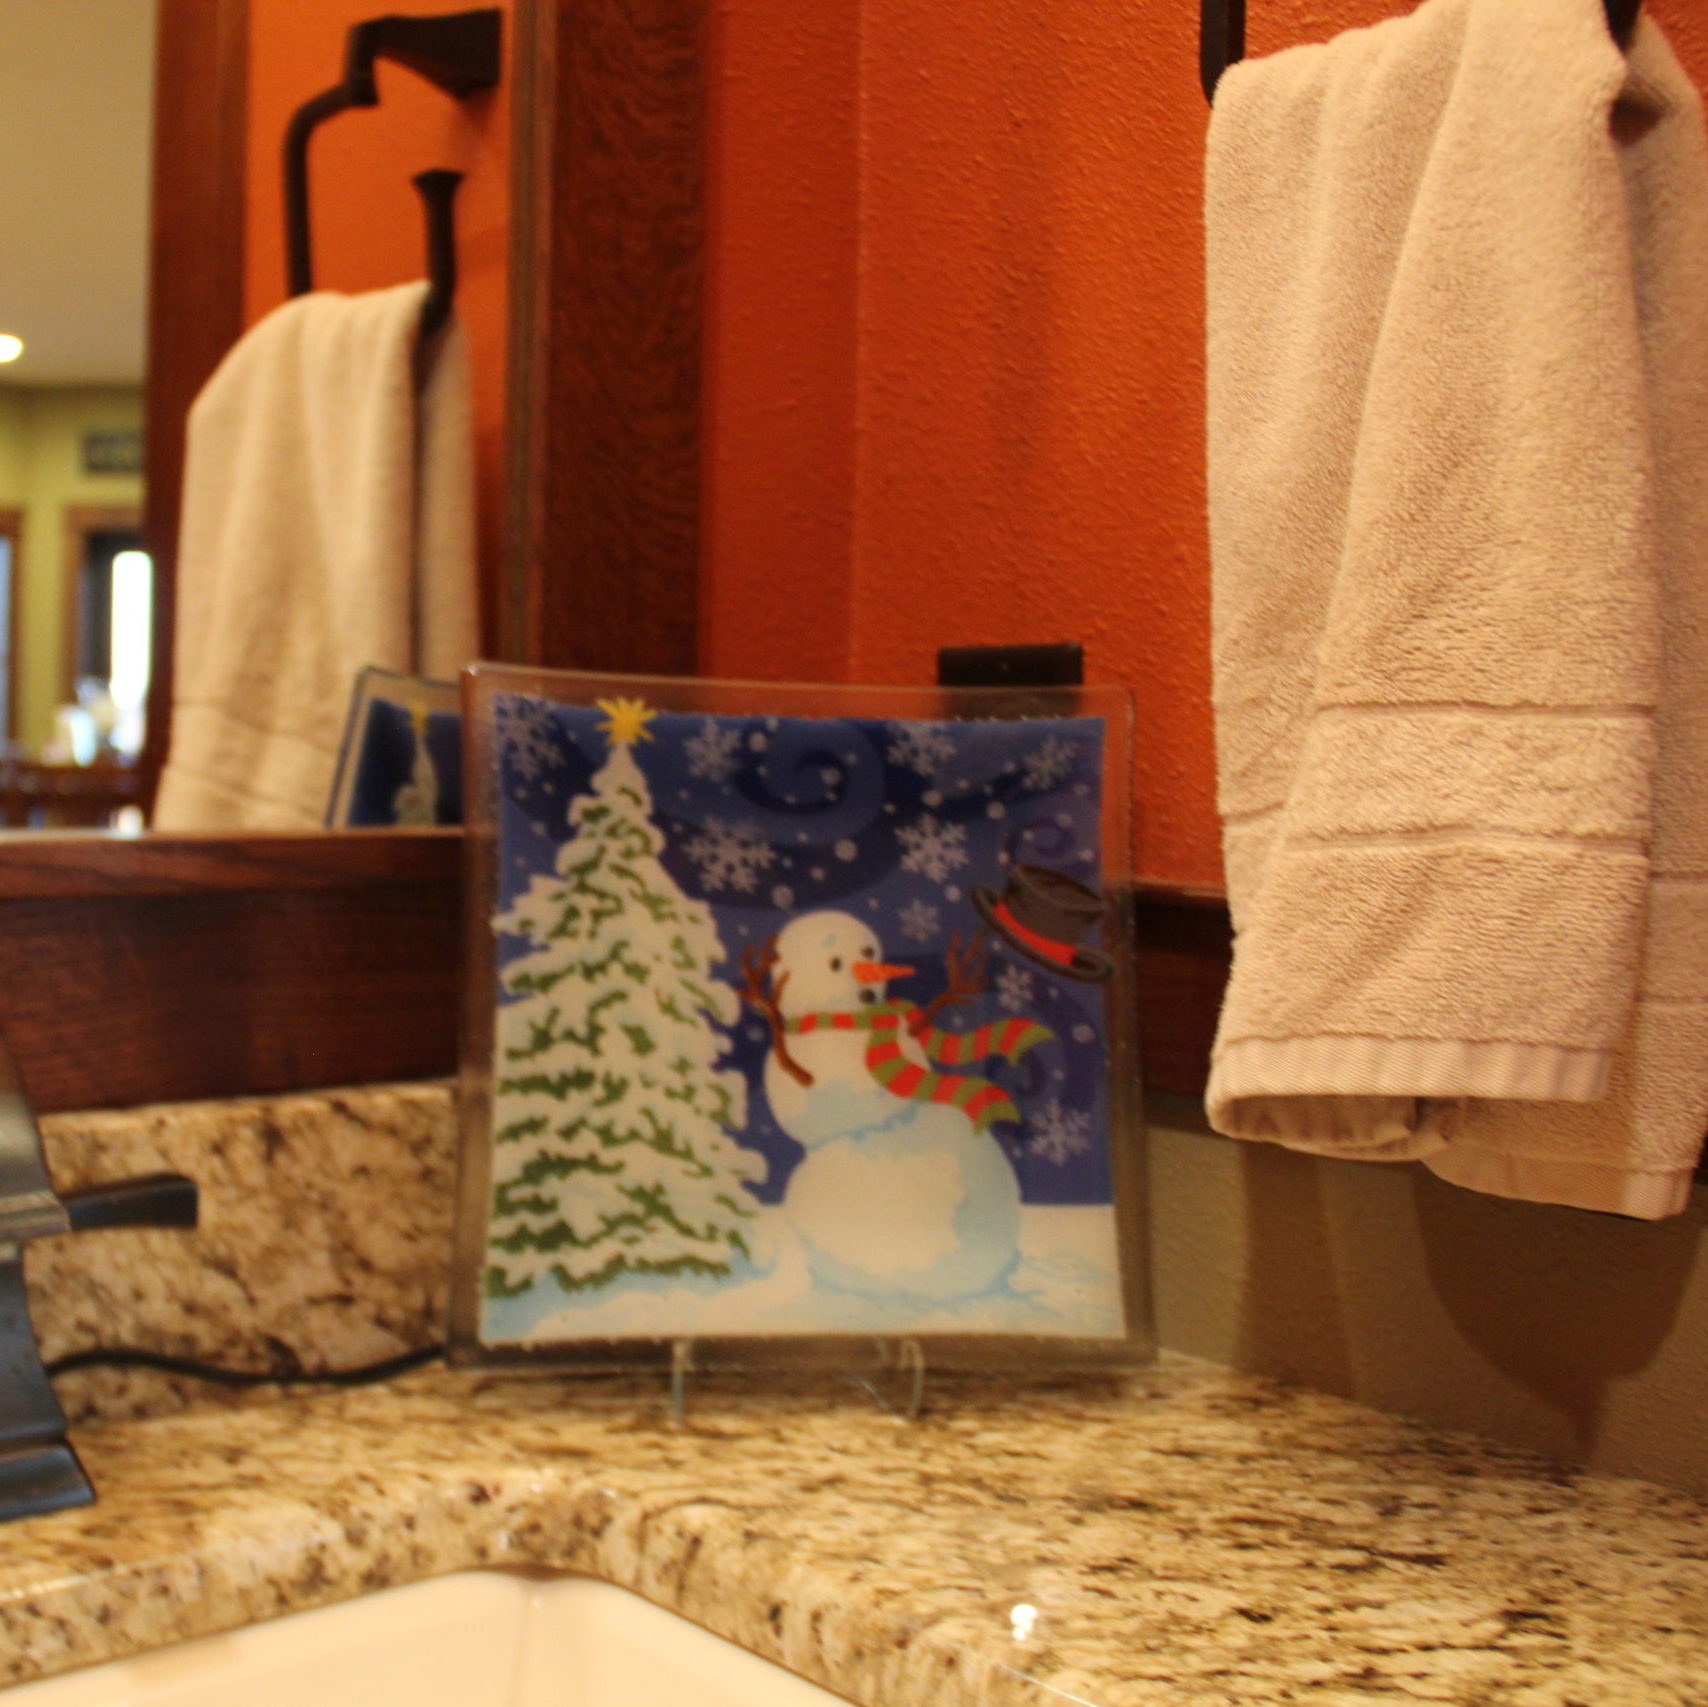 The Windy Snowman plate by Peggy Karr fits great in the powder room